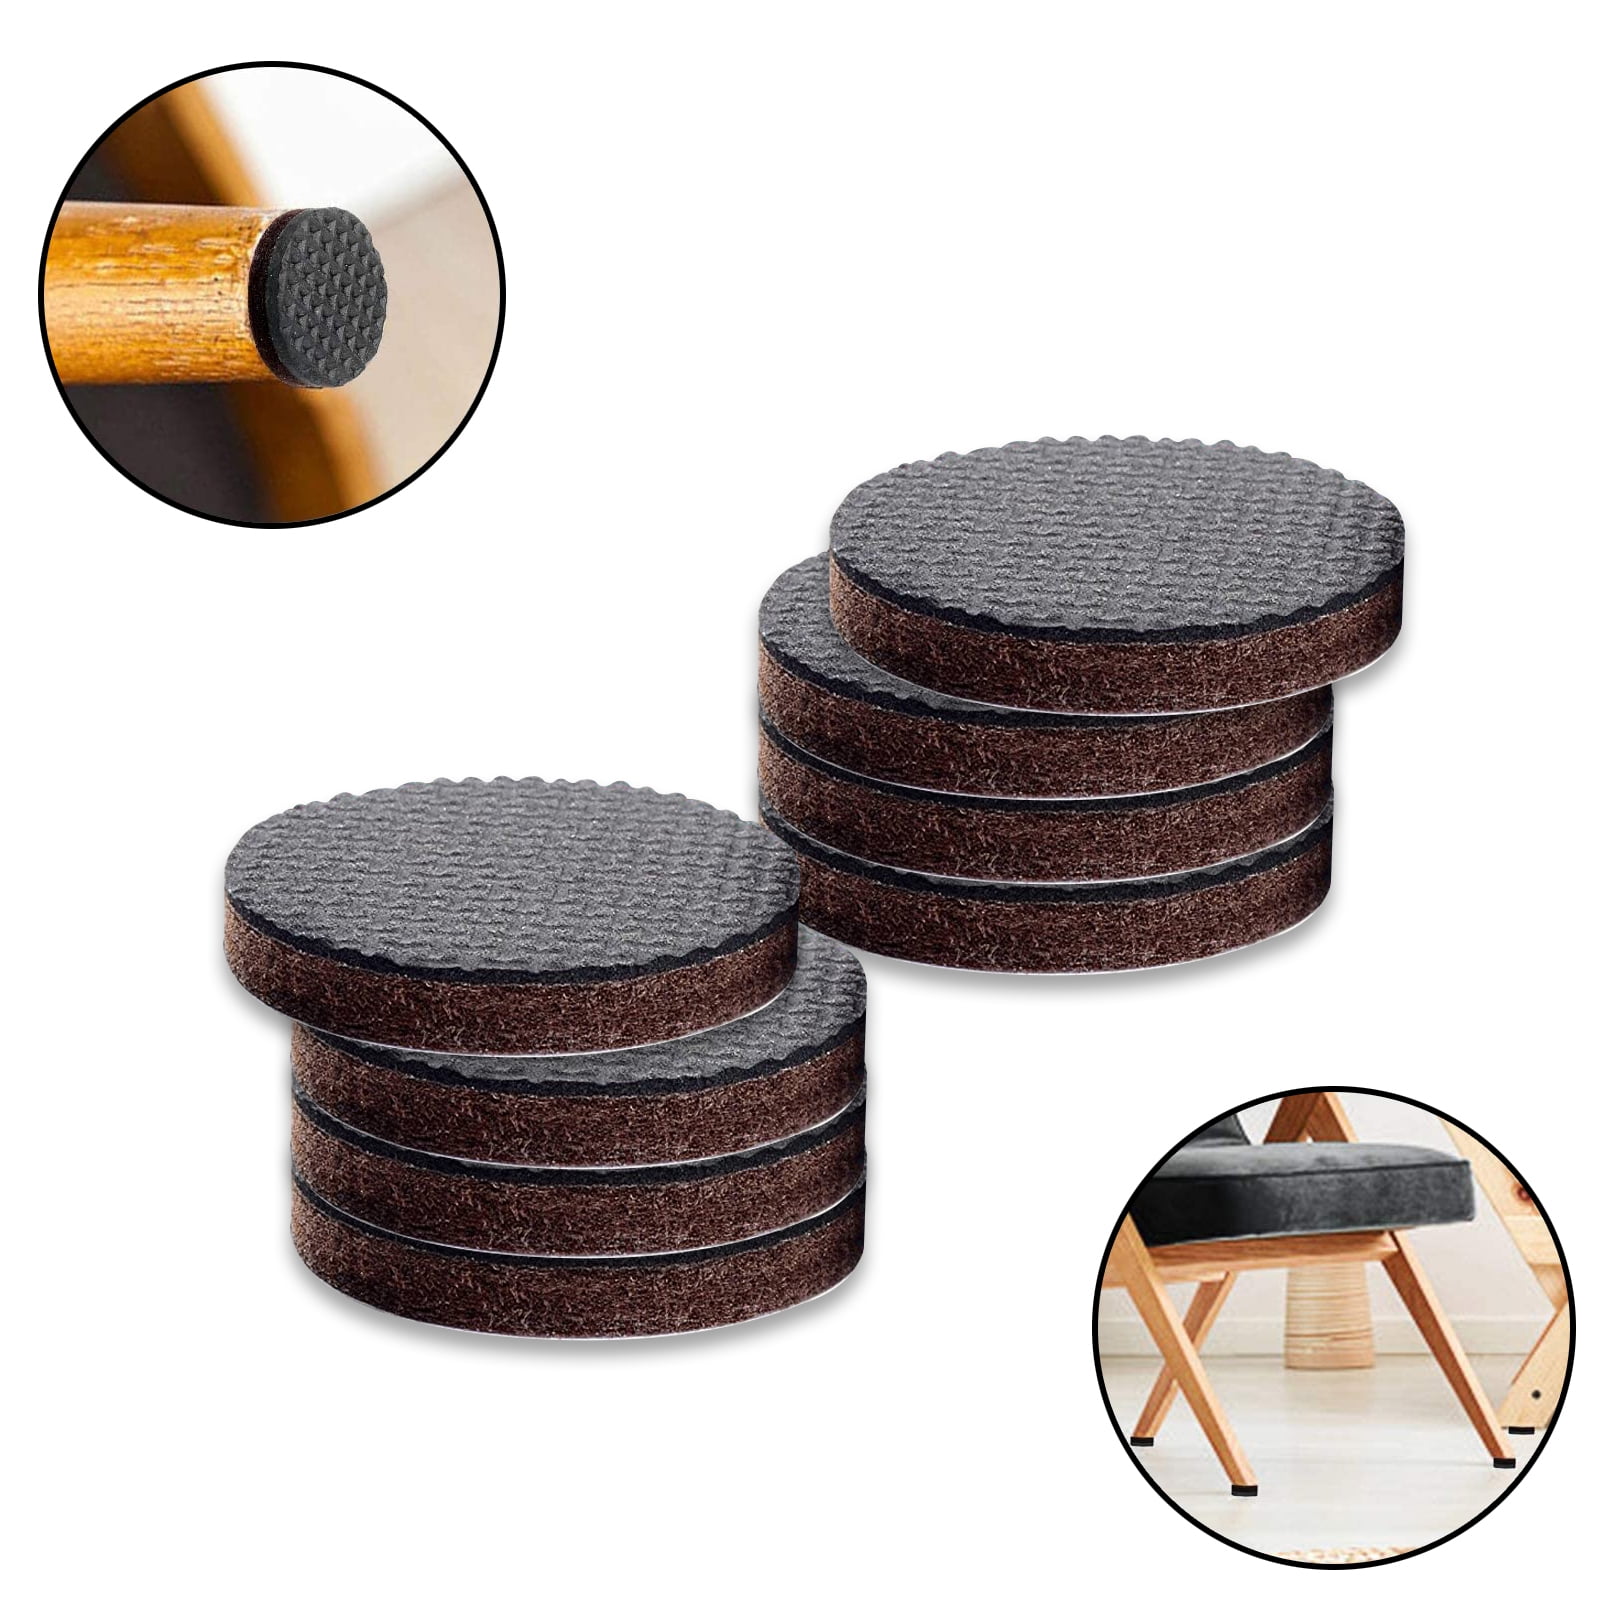 Slipstick GorillaPads CB149 Non-Slip Furniture Pads/Rubber Grippers (Set of  8) Self-Adhesive Furniture Feet Floor Protectors, 1-1/2 inch Round, Black